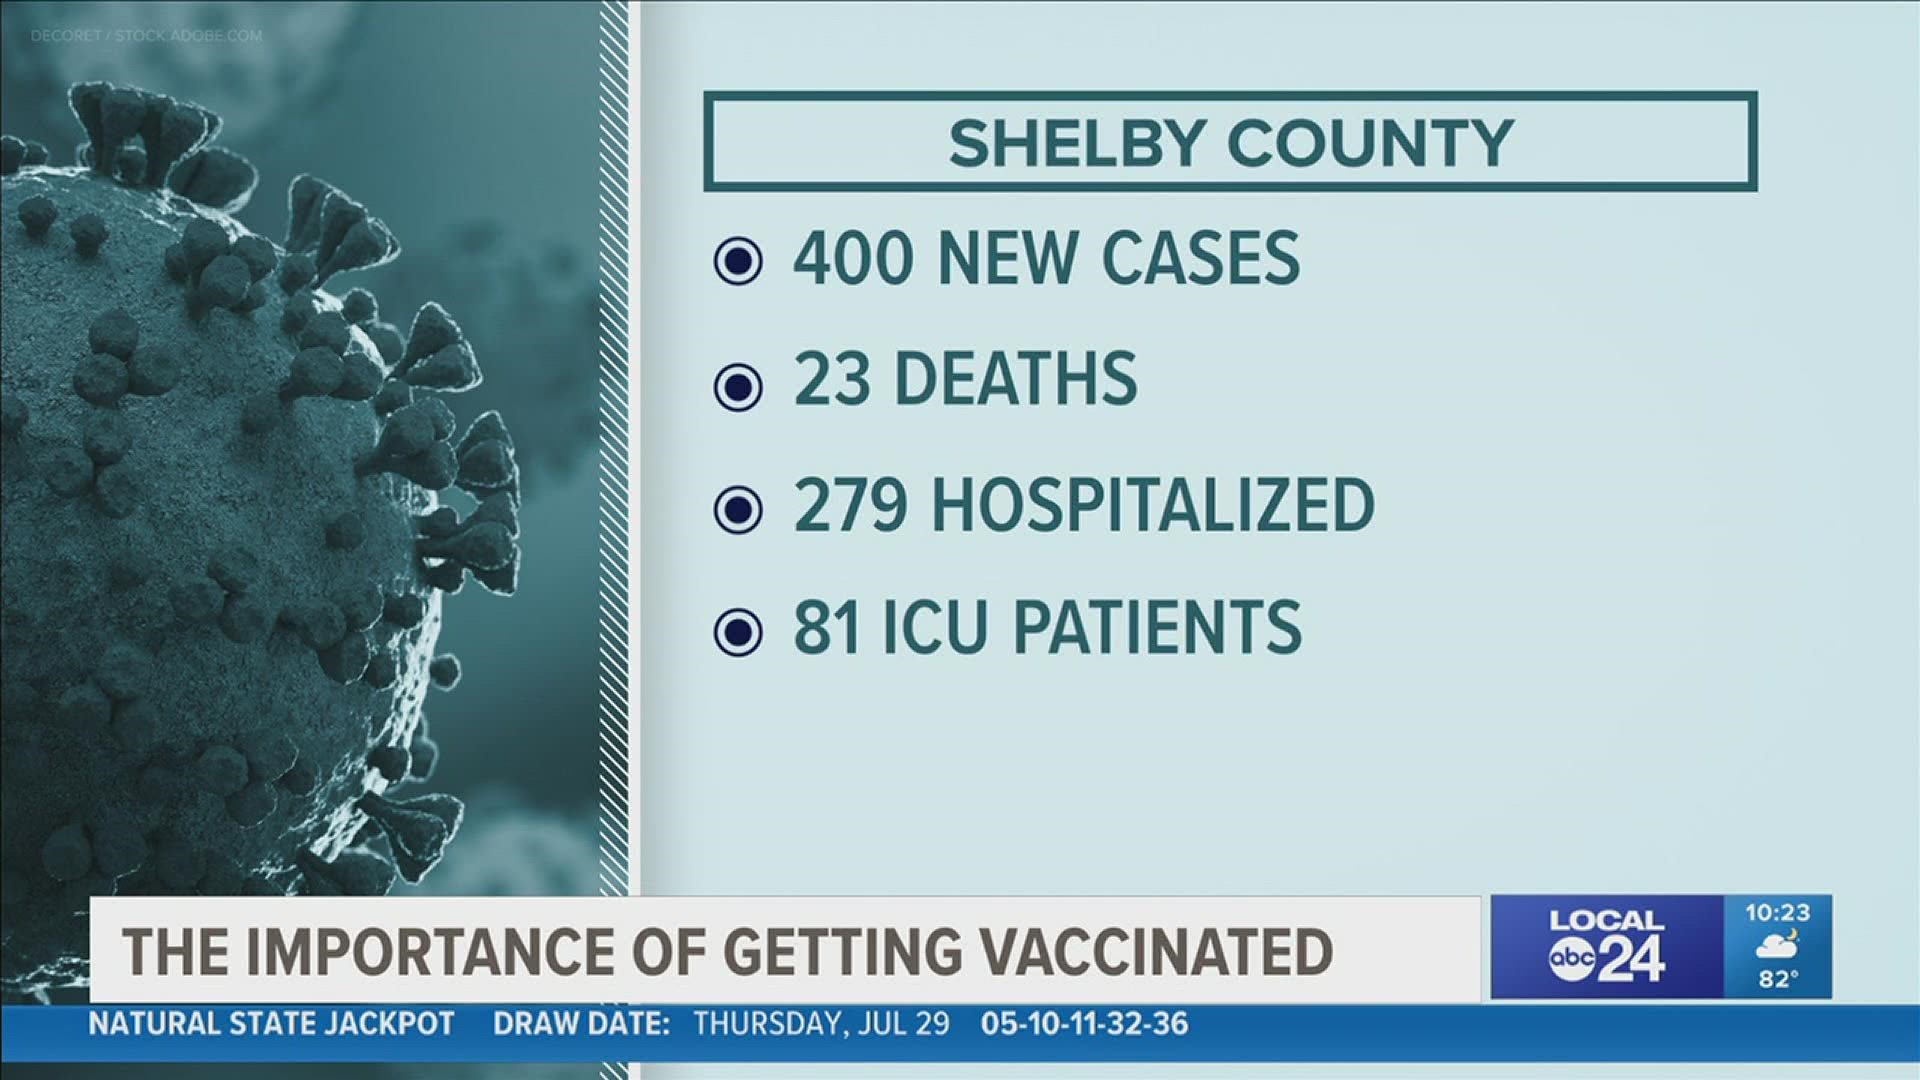 As COVID cases, hospitalizations, and deaths increase in Shelby County, the importance of getting vaccinated increases.